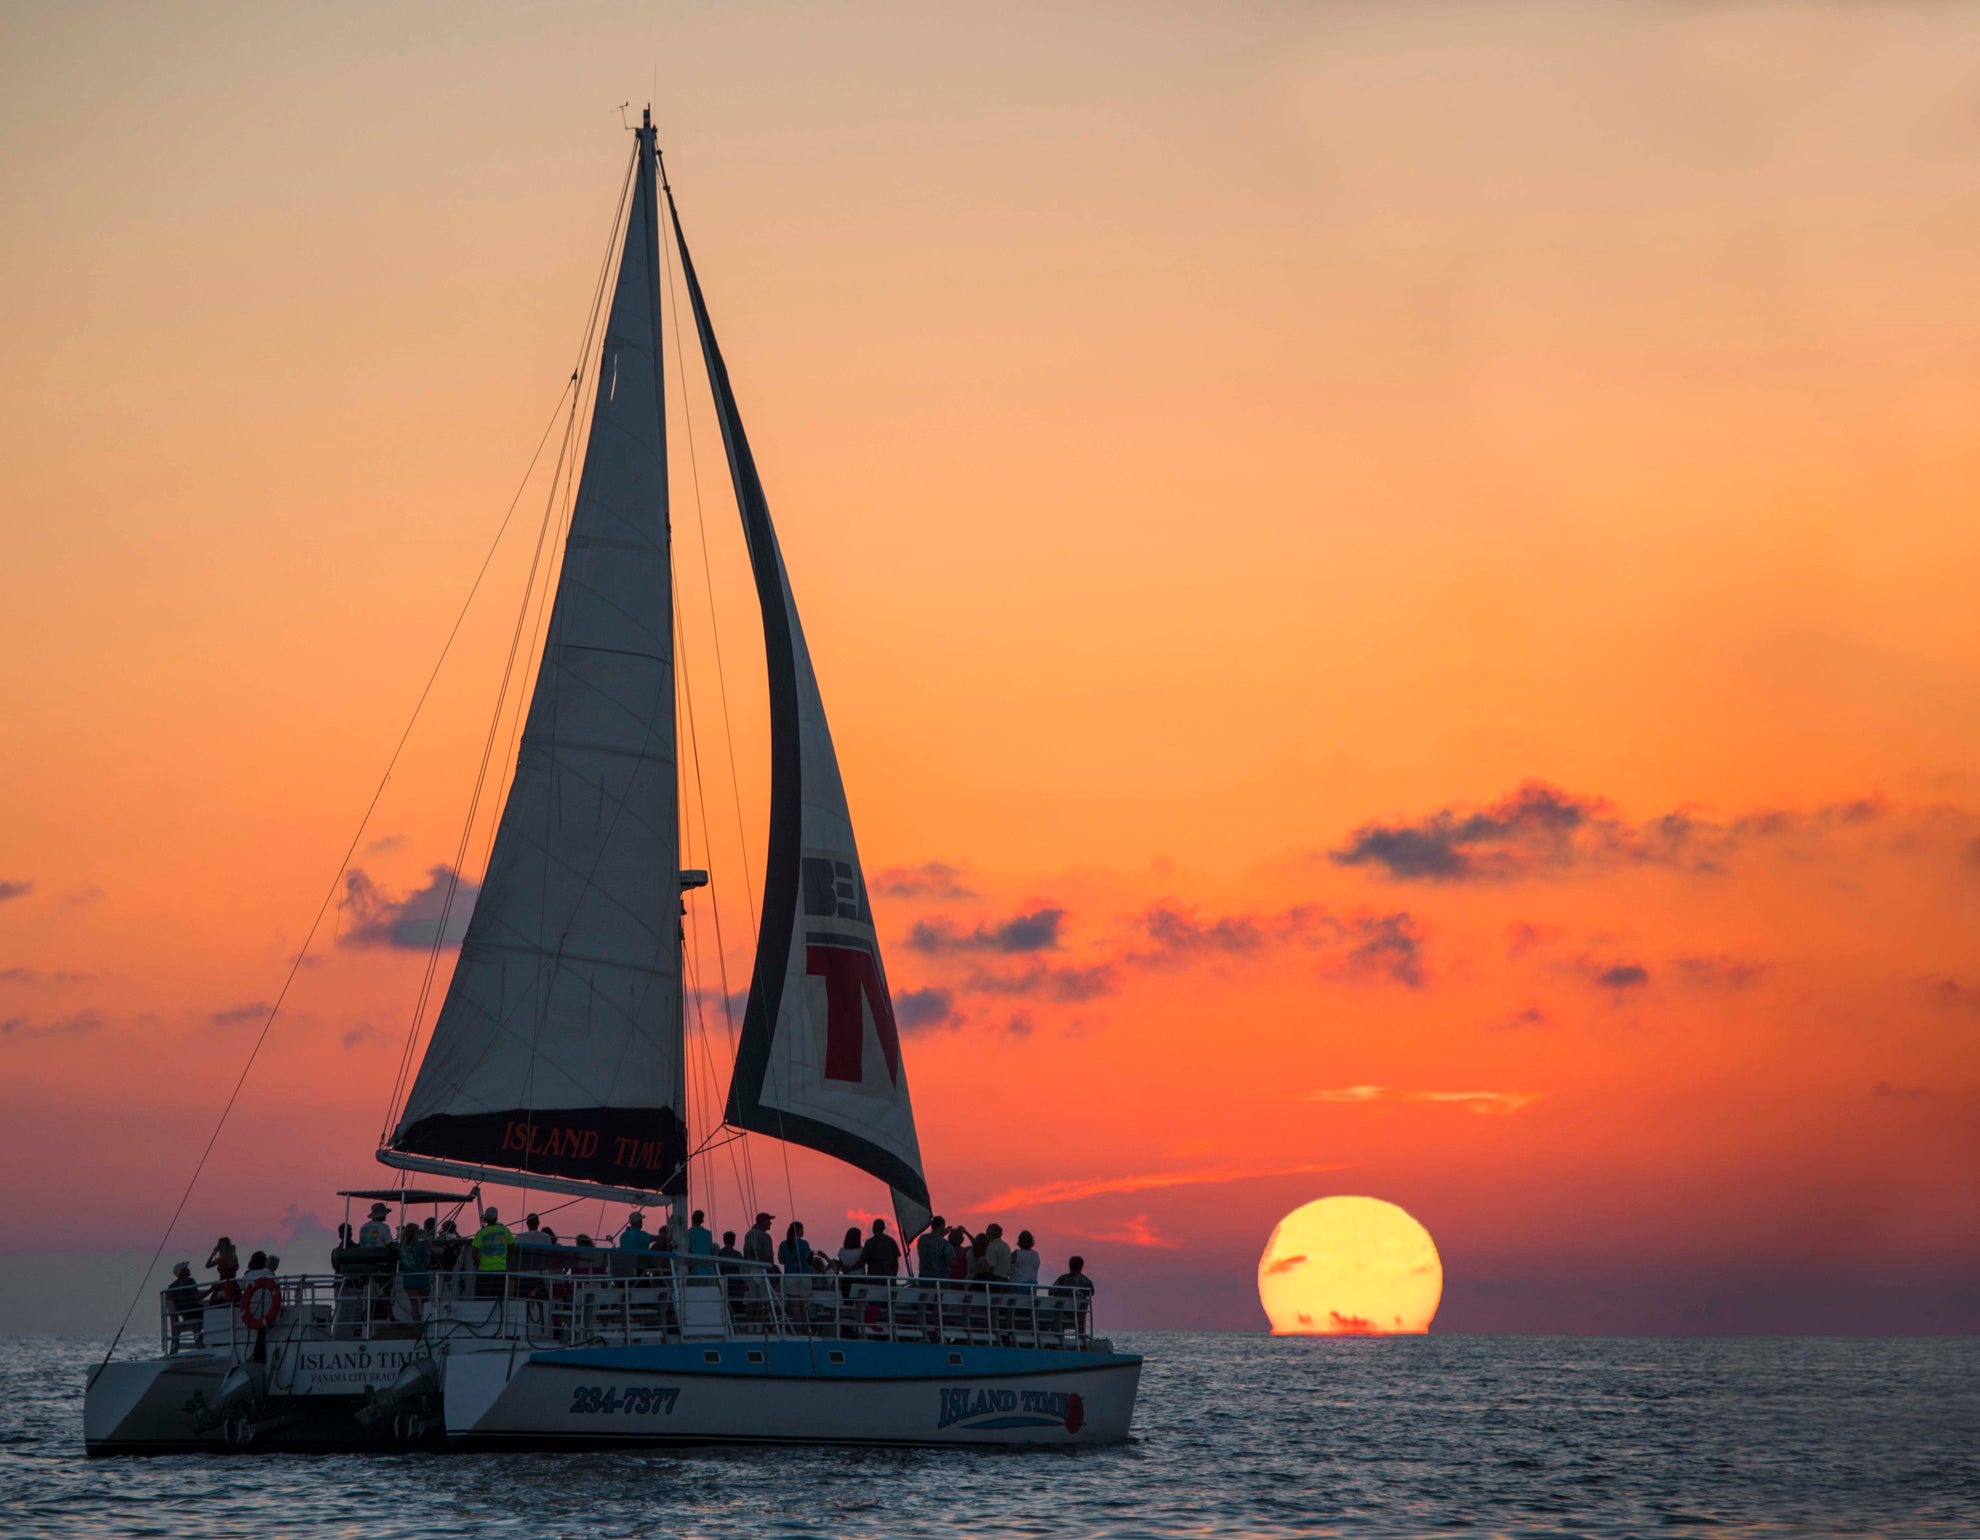 Free Ticket to Island Time Sunset Cruise